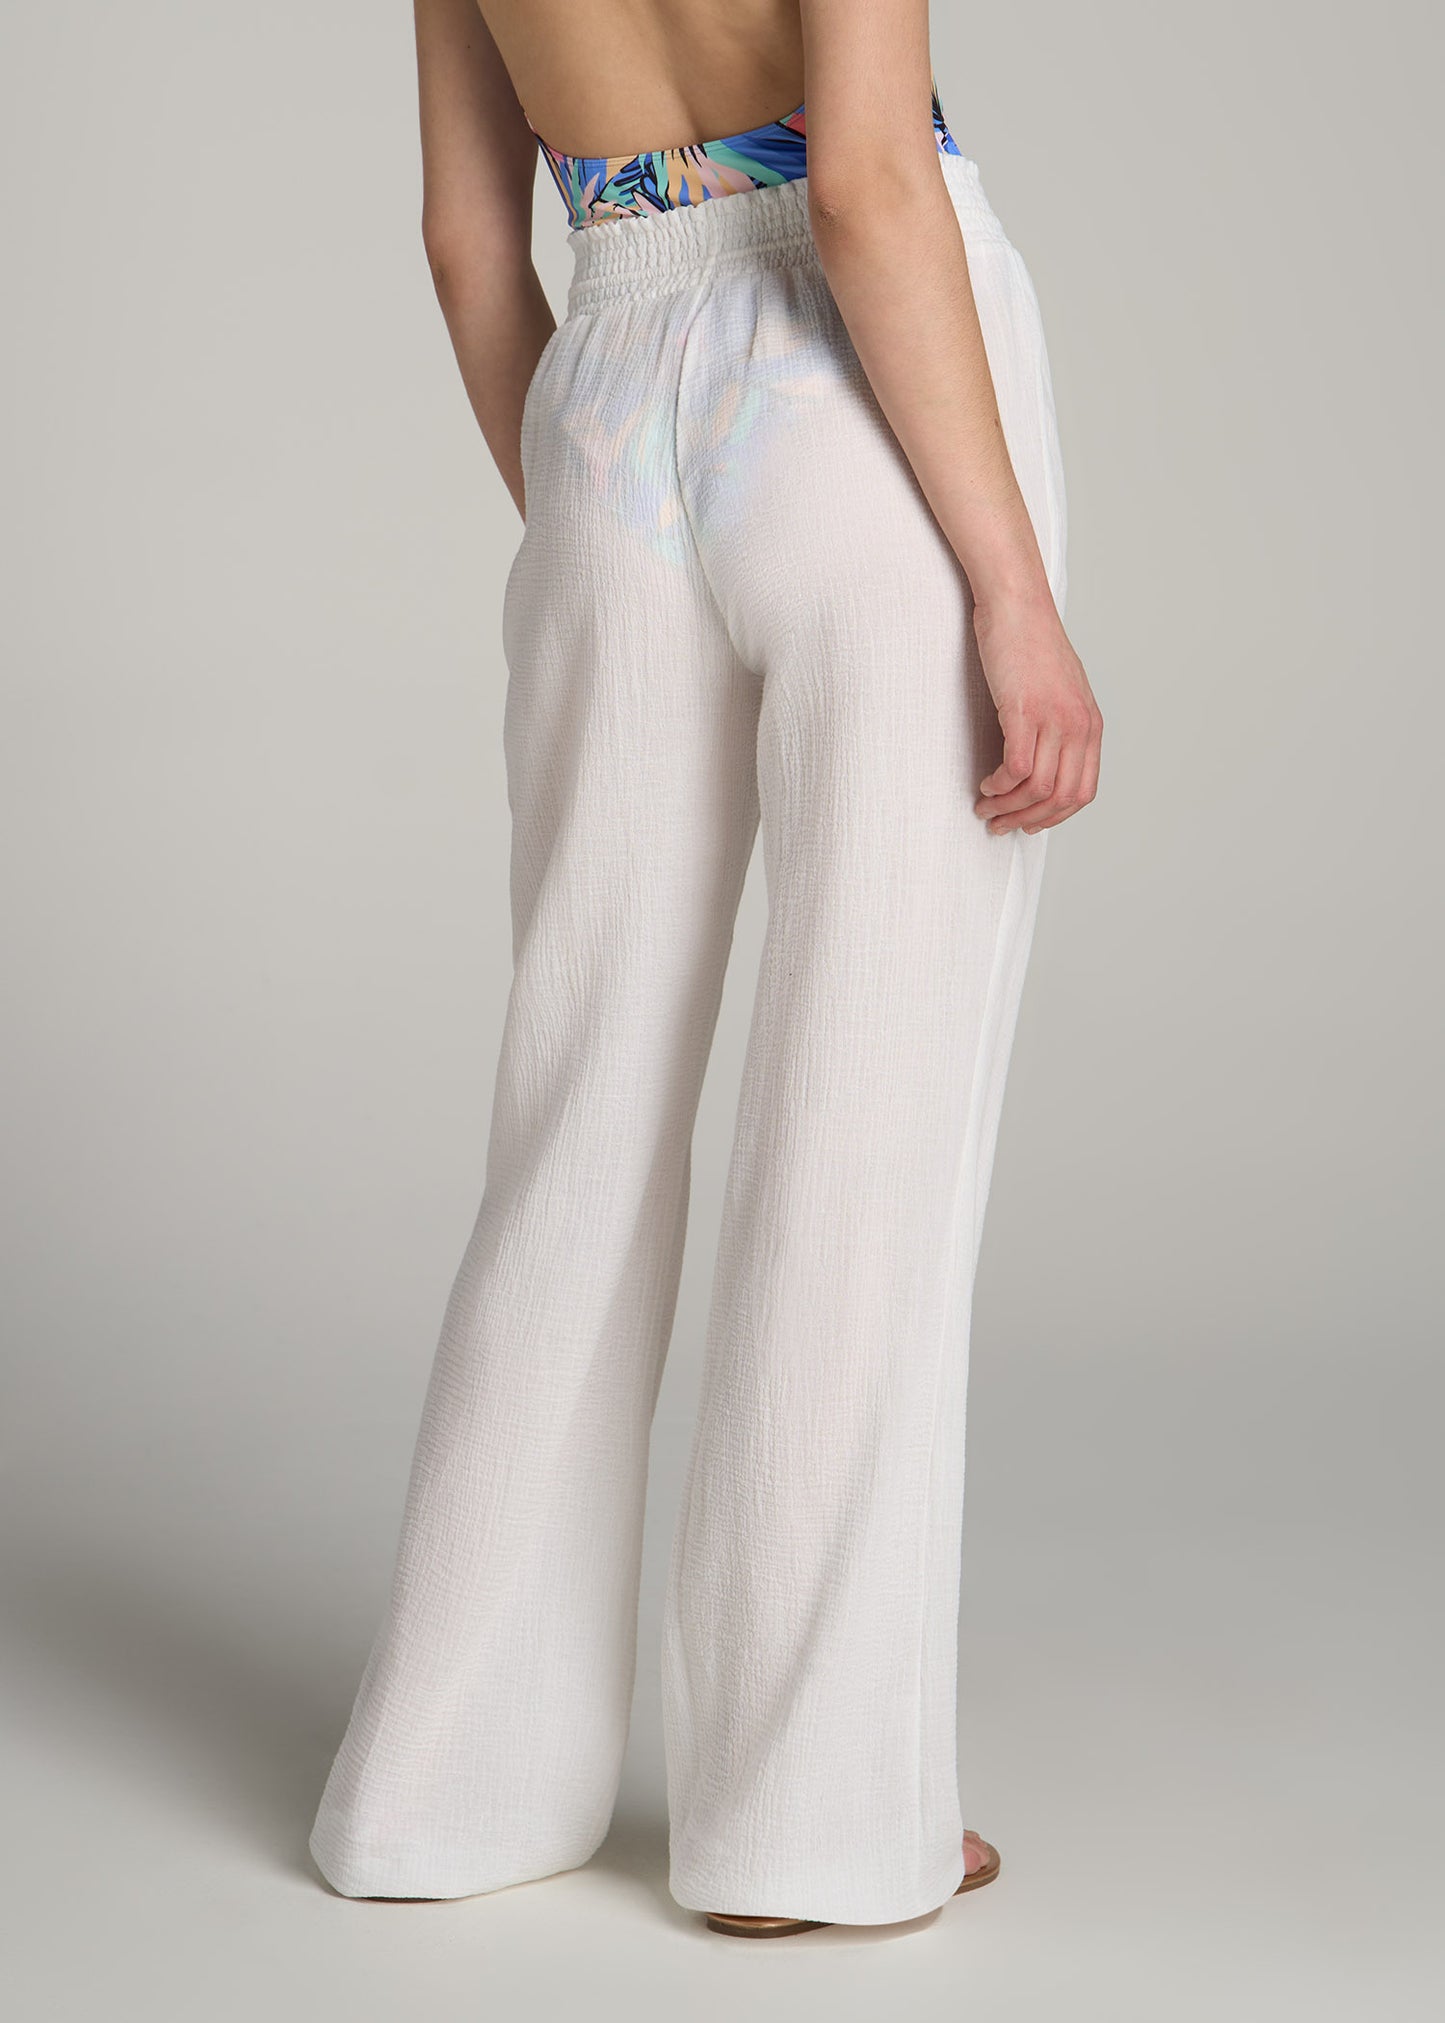 Gauze Cover Up Pants for Tall Women in Bright White